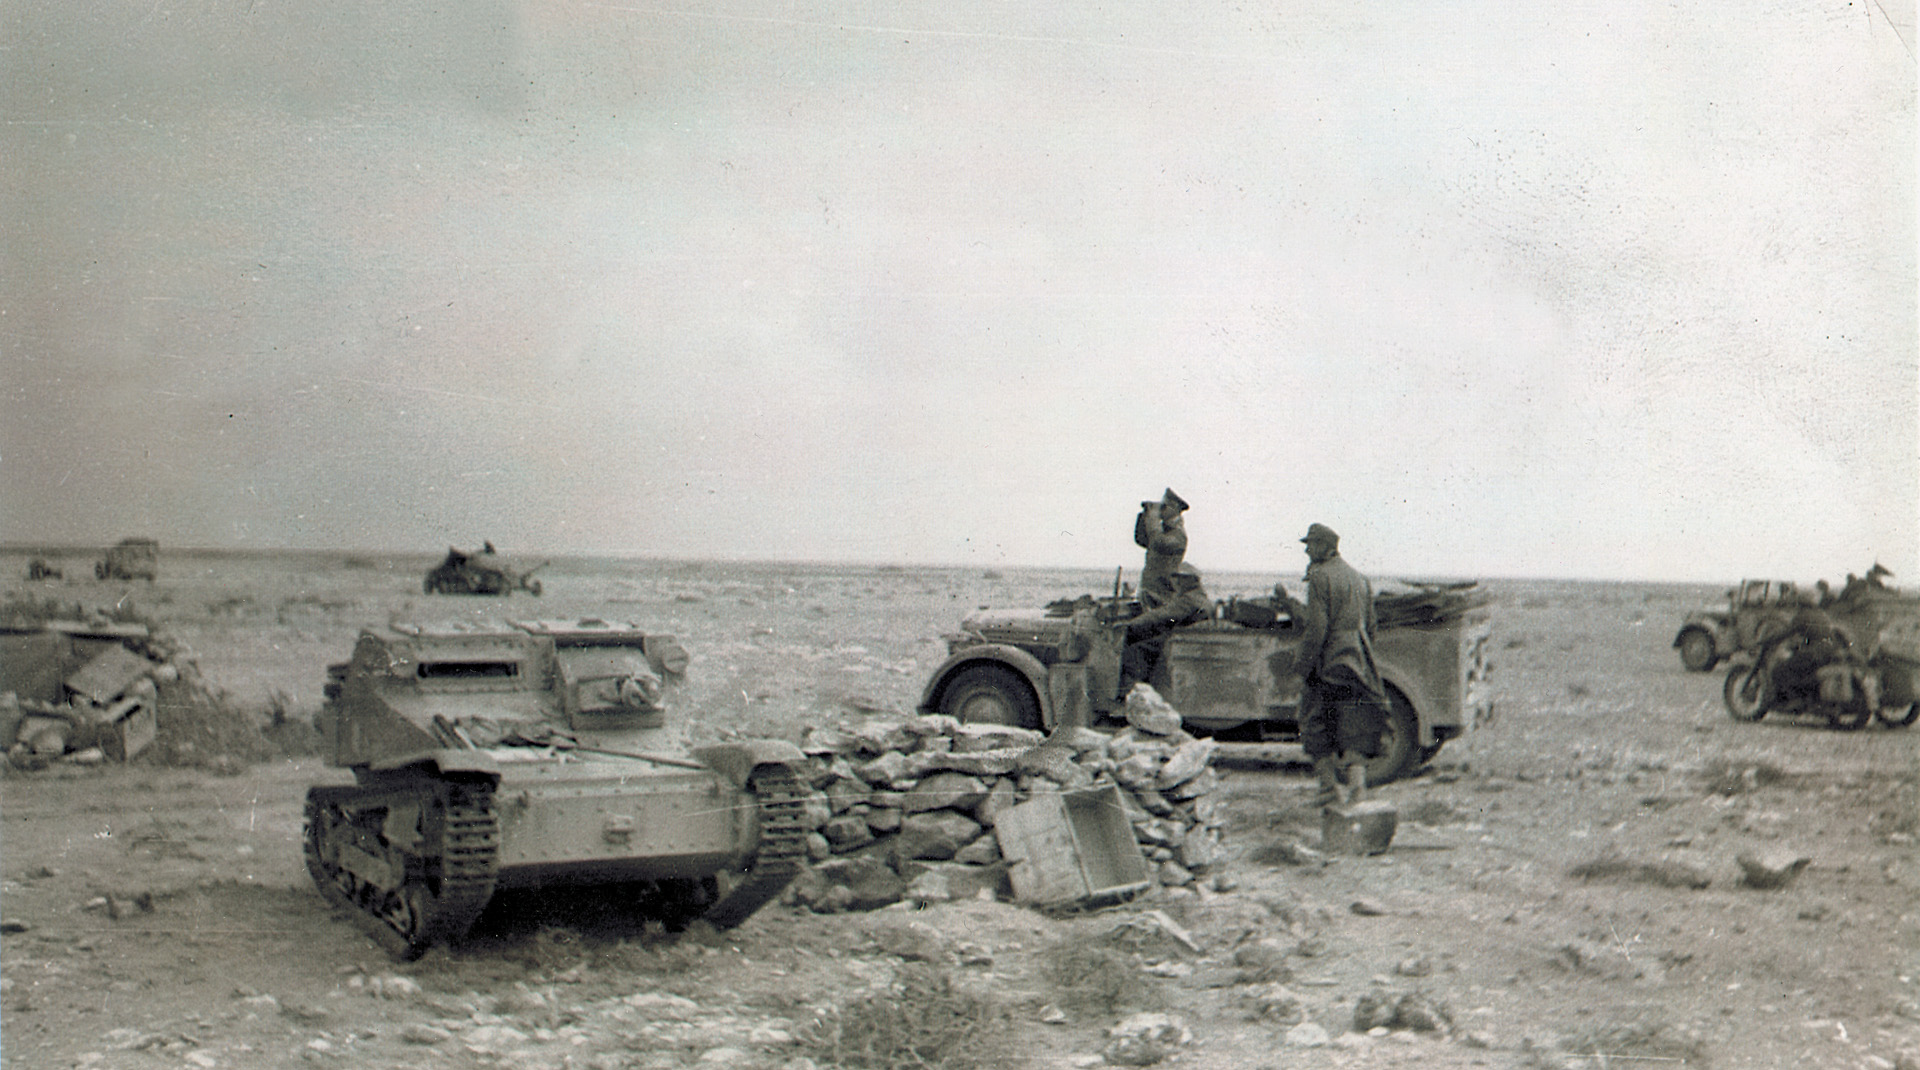 An abandoned Bristish Sten gun carrier sits nearby as Field Marshal Erwin Rommel surveys the ground before elements of his vaunted Afrika Korps.